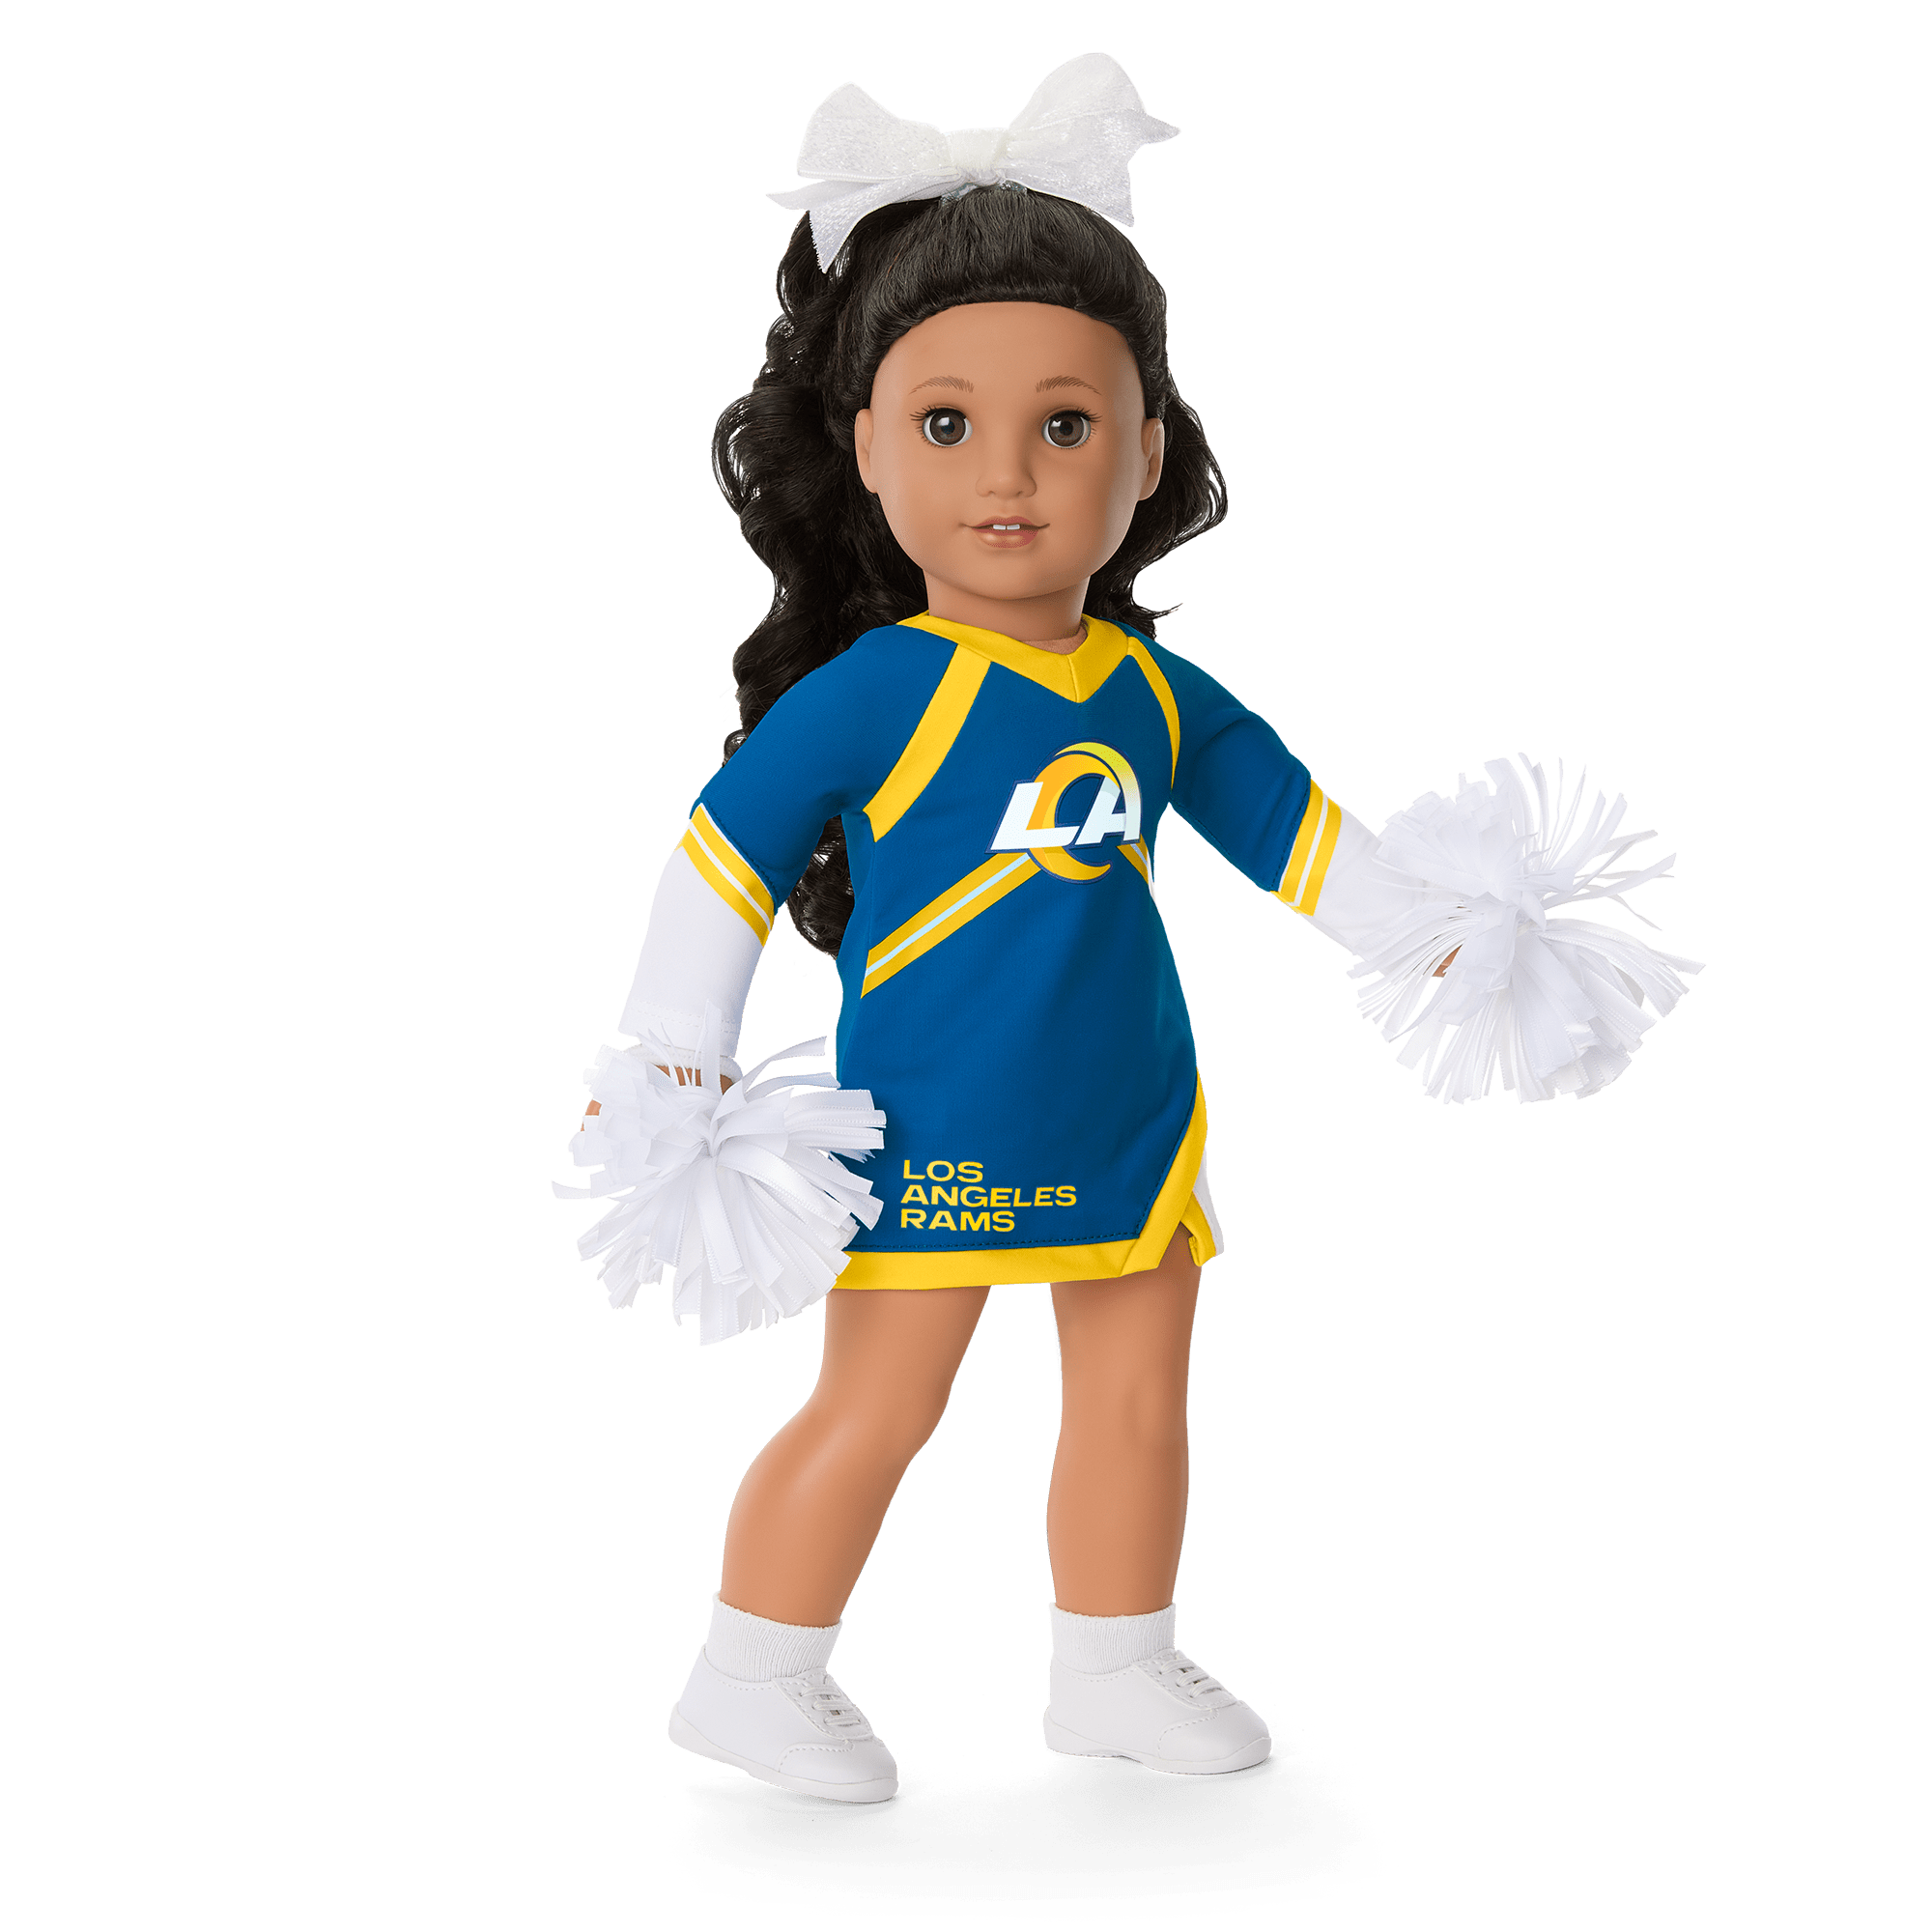 Red Cheerleader Outfit 18 Doll Clothes for American Girl Dolls